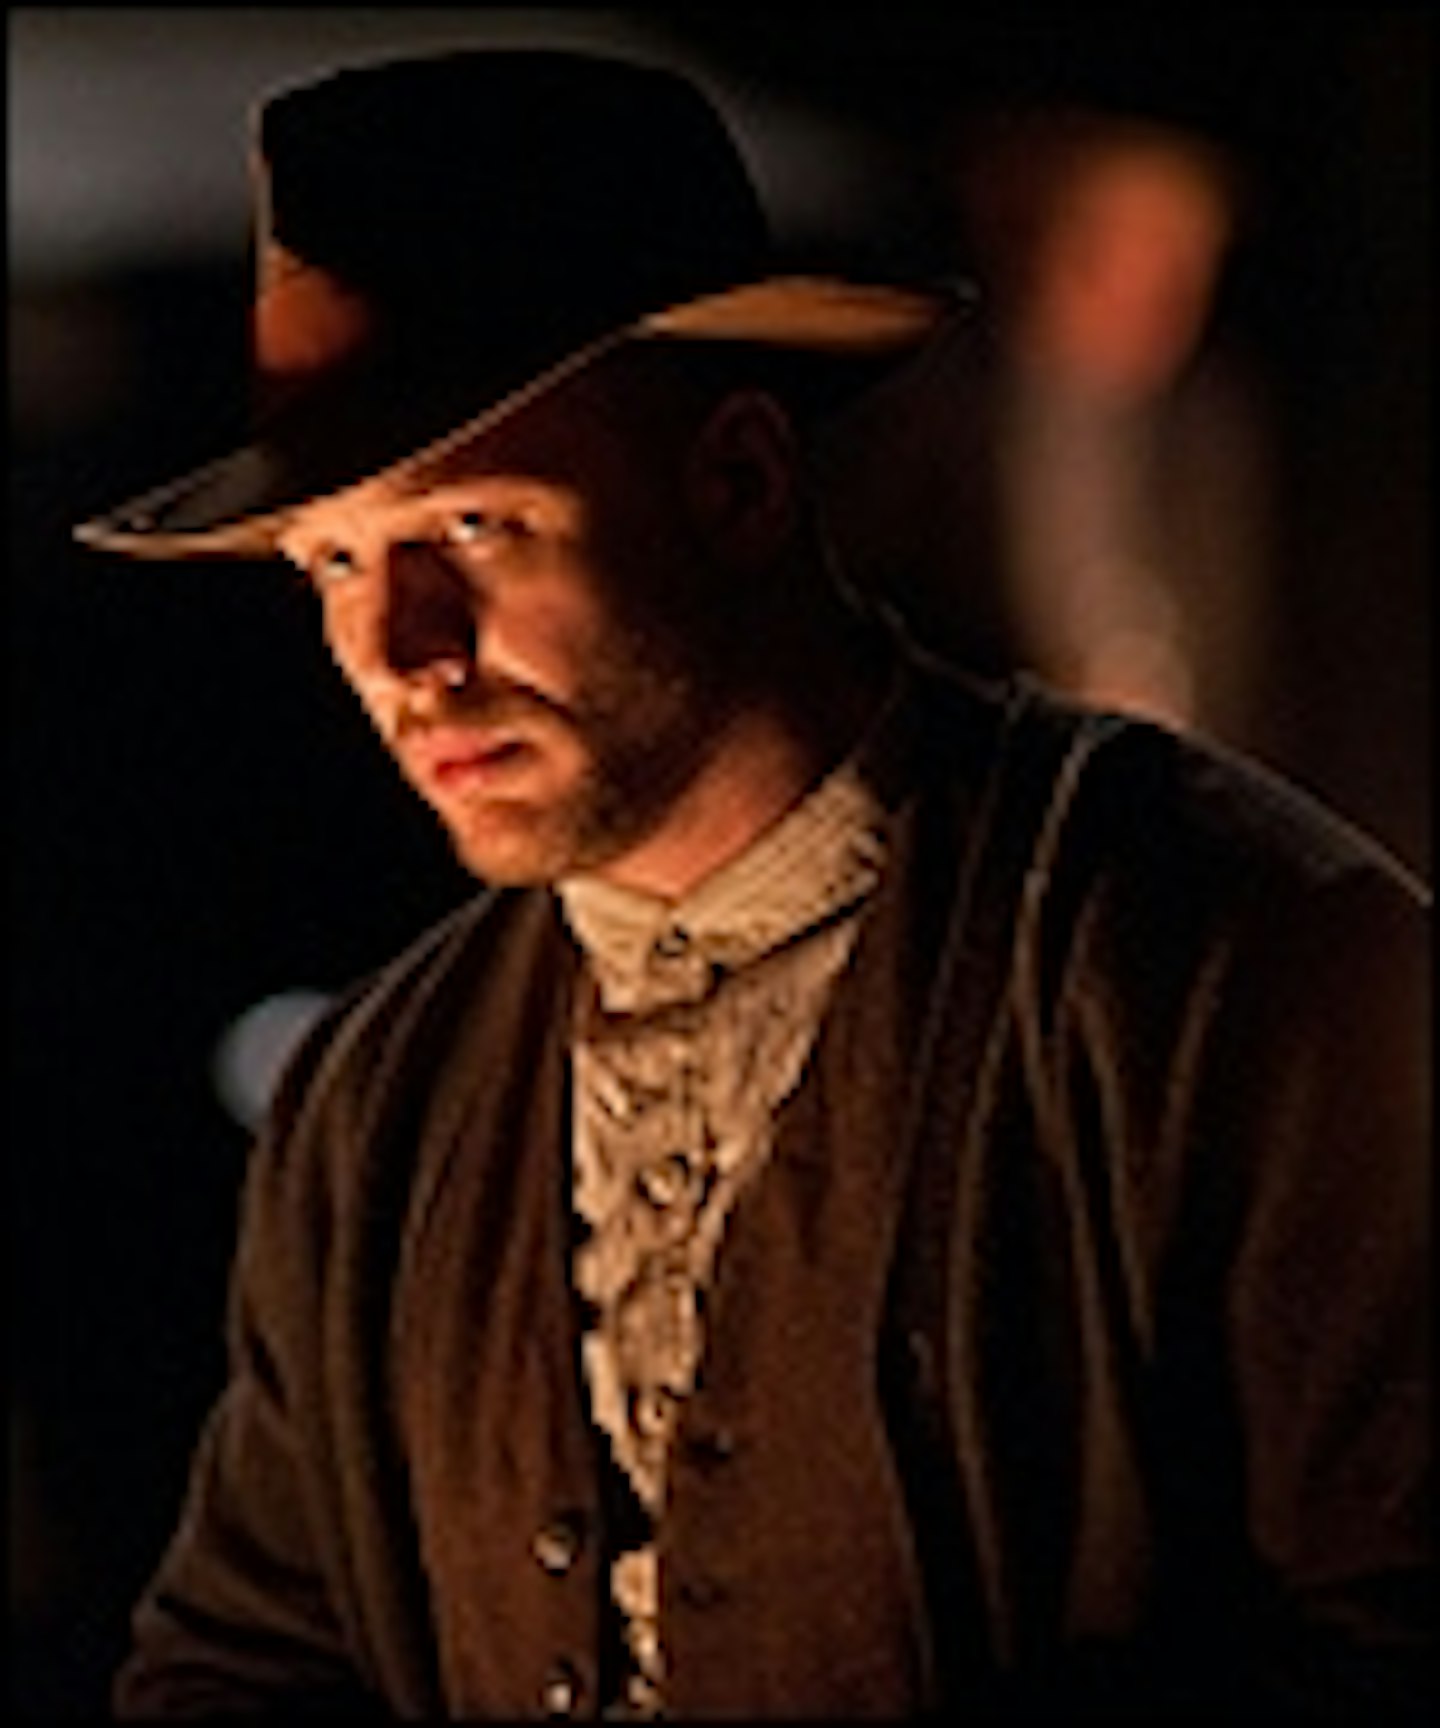 Two New Lawless Clips Online